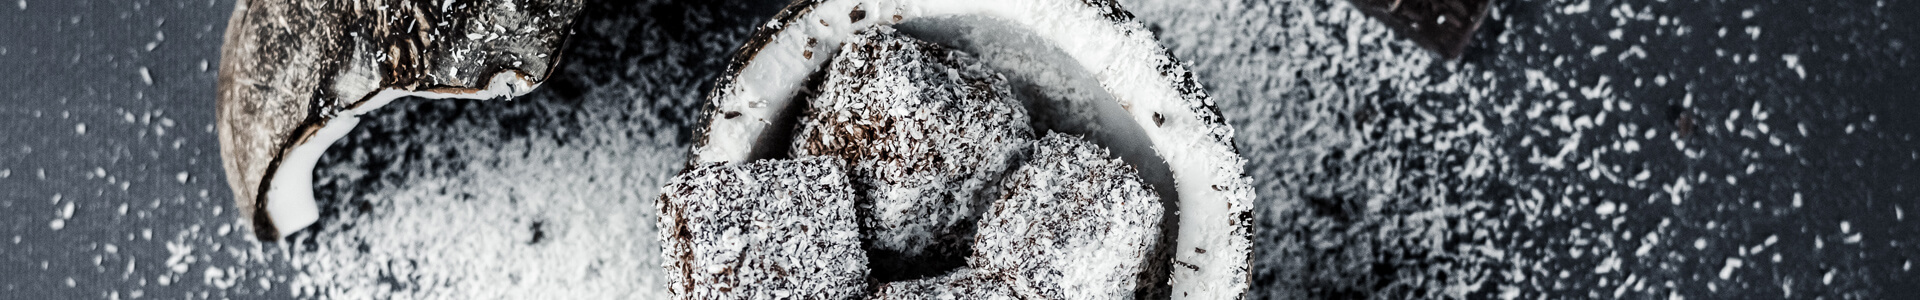 Coconut halves, shredded coconut and chocolate scattered over a black plate.